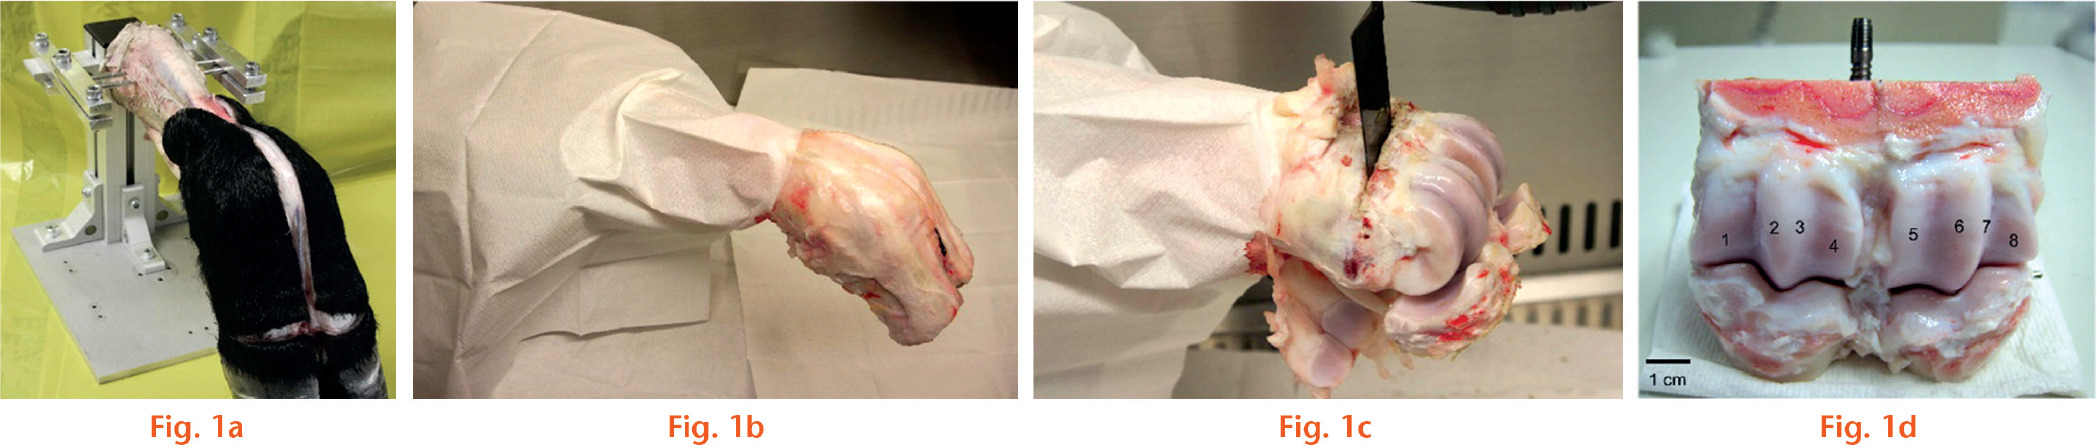  
            Photographs showing preparation of the bovine metatarsophalangeal joint and the cartilage sampling sites: a) the bovine foot was suspended in the frame by inserting two metal pins at the proximal metatarsus. The incision was from the midline of the metatarsus down to the proximal interphalangeal joint with a transverse circumferential cut so that the hide and hoof could be removed; b) the skinned foot was wrapped with sterilized paper to establish a sterile safety zone; c) after removal of the surrounding soft tissues, the metatarsophalangeal joint was then exposed and cut off at approximately 1 cm above and below the cartilage margin; d) for the dynamic model, a specially made peg was inserted into the top of the transected metatarsal bone of the joint. Cartilage samples were taken from eight articular facets in the metatarsal part of the joint. The facets numbered 1, 4, 5 and 8 were flatter and larger than the facets numbered 2, 3, 6 and 7, which were located beside the articular ridges. In a typical experiment, facets 1 and 8 each provided five sampling sites, and the other six facets offered six sampling sites each.
          